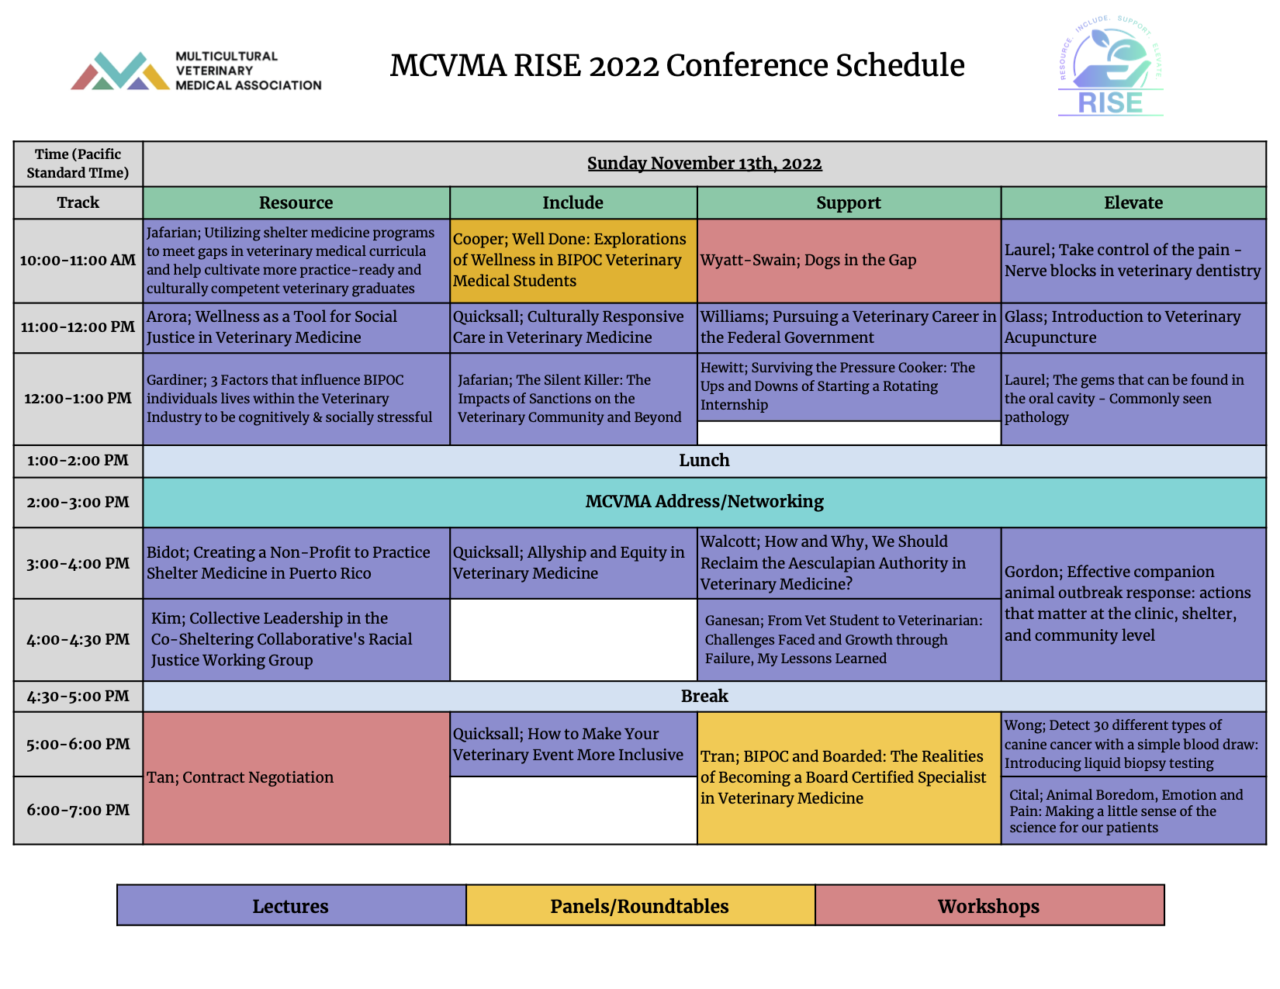 RISE Conference Schedule 2022 Multicultural Veterinary Medical